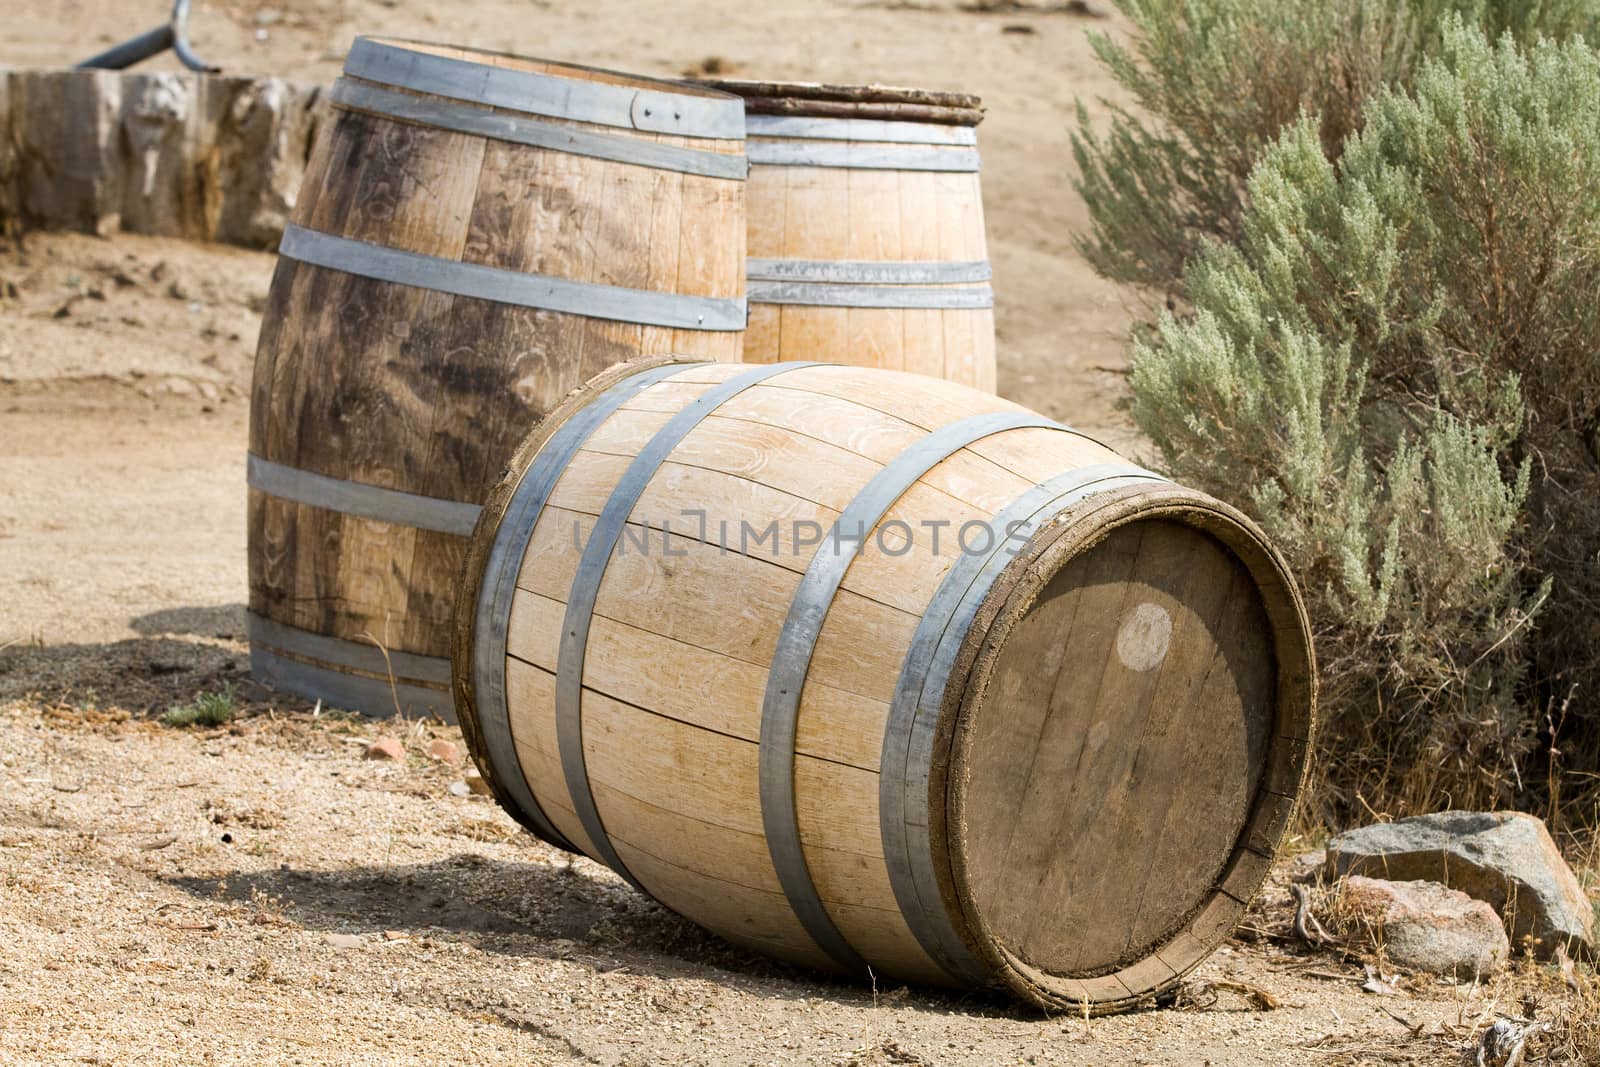 Old wooden storage barrels lay discarded outside on the ground.